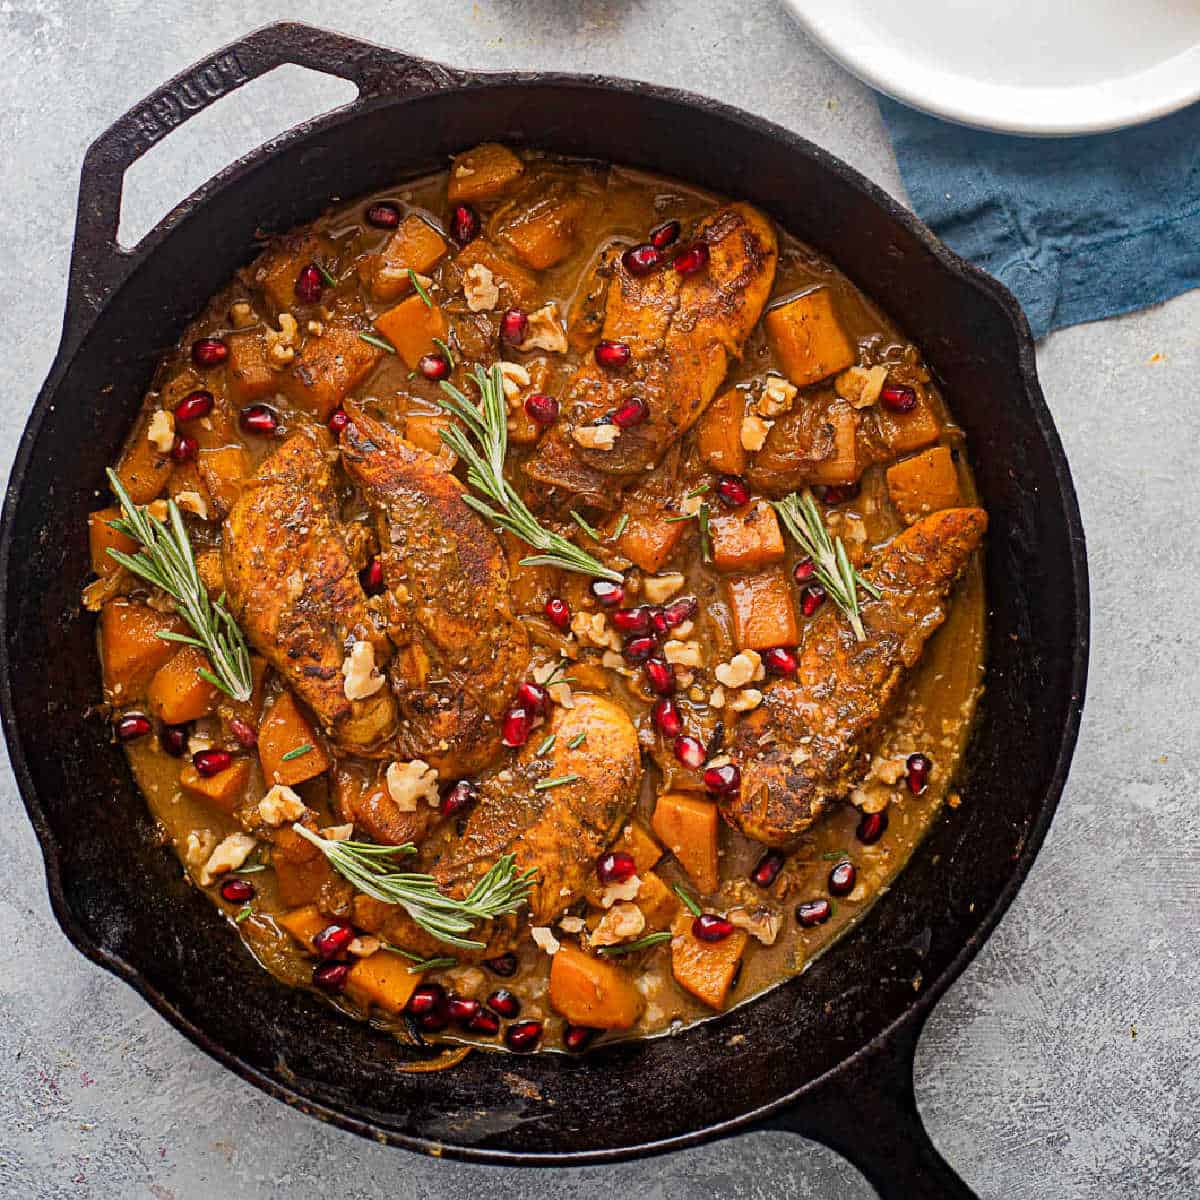 An easy skillet chicken and butternut squash dinner that's ready in 30 minutes. Juicy chicken and butternut squash are flavored with honey, mustard and spices to make a wonderful meal. 
